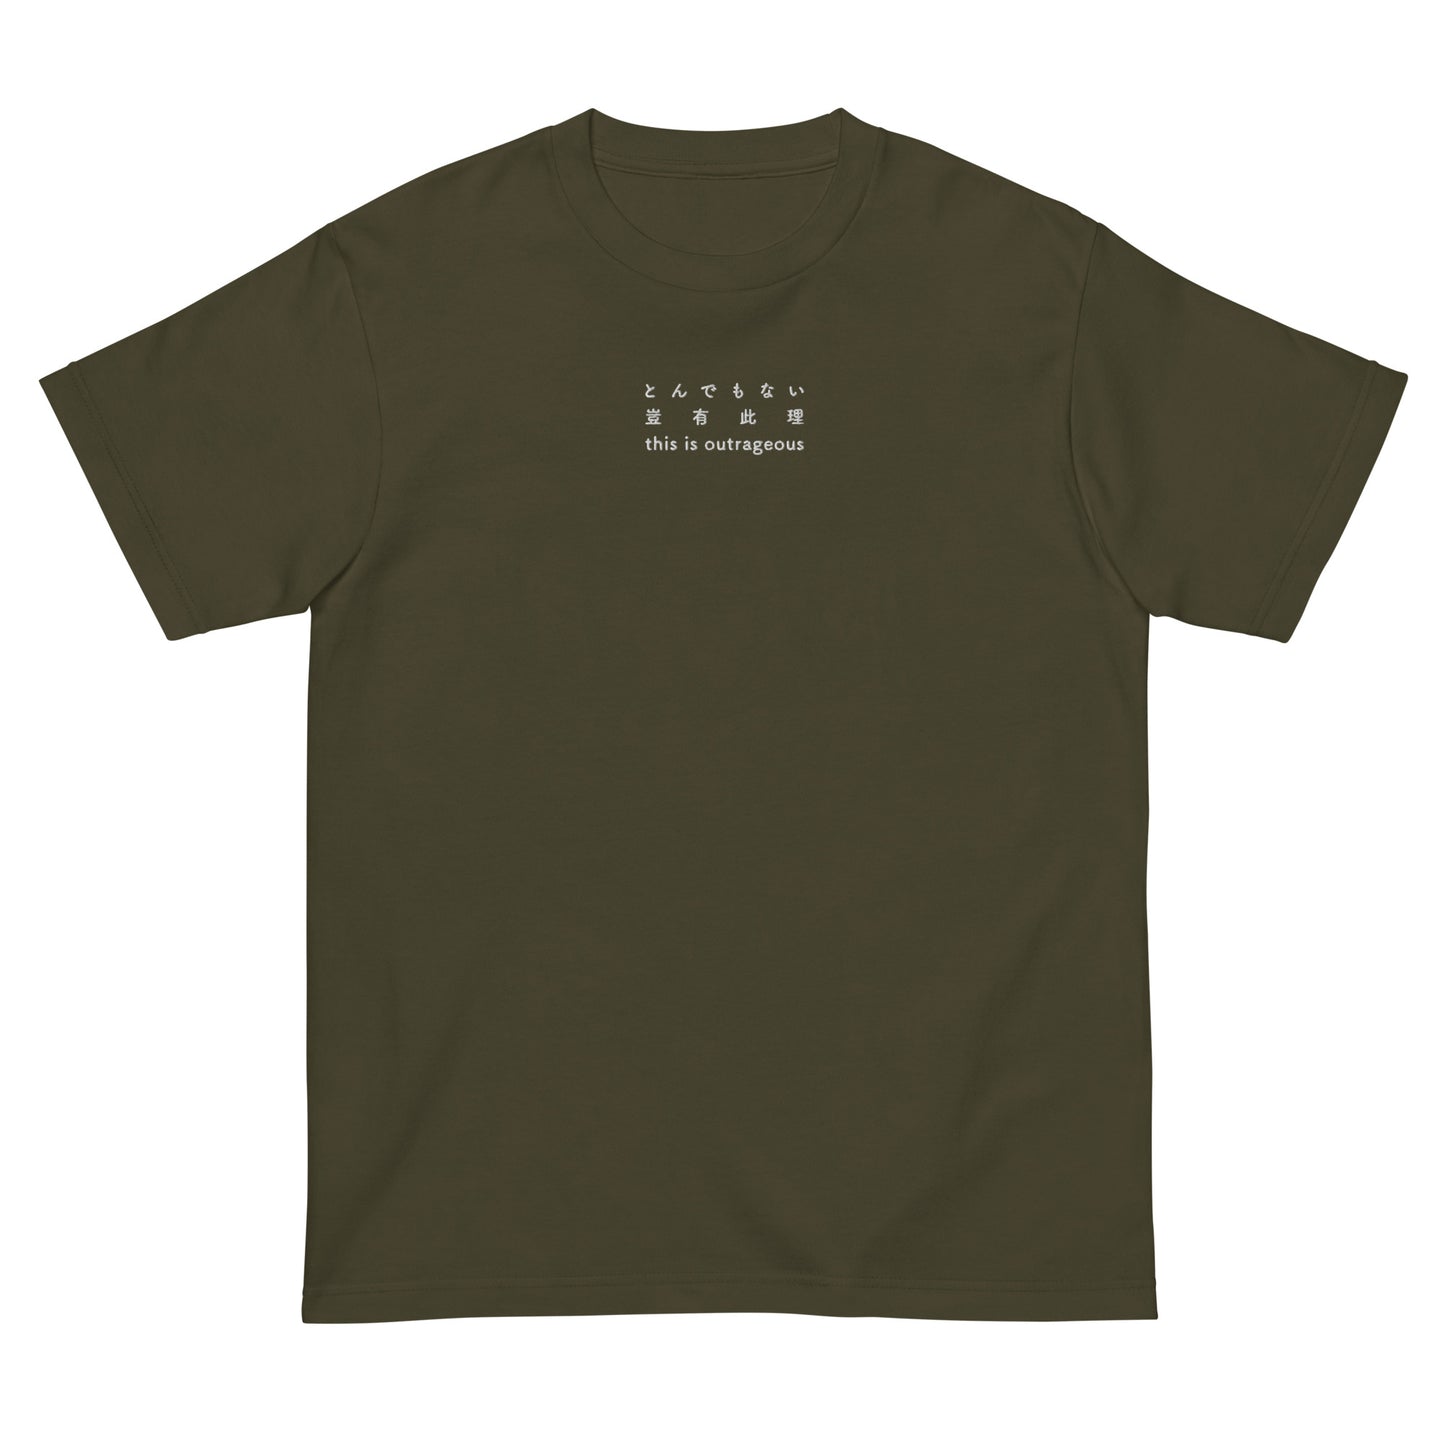 Military Green High Quality Tee - Front Design with an White Embroidery "This is Outrageous" in Japanese, Chinese and English